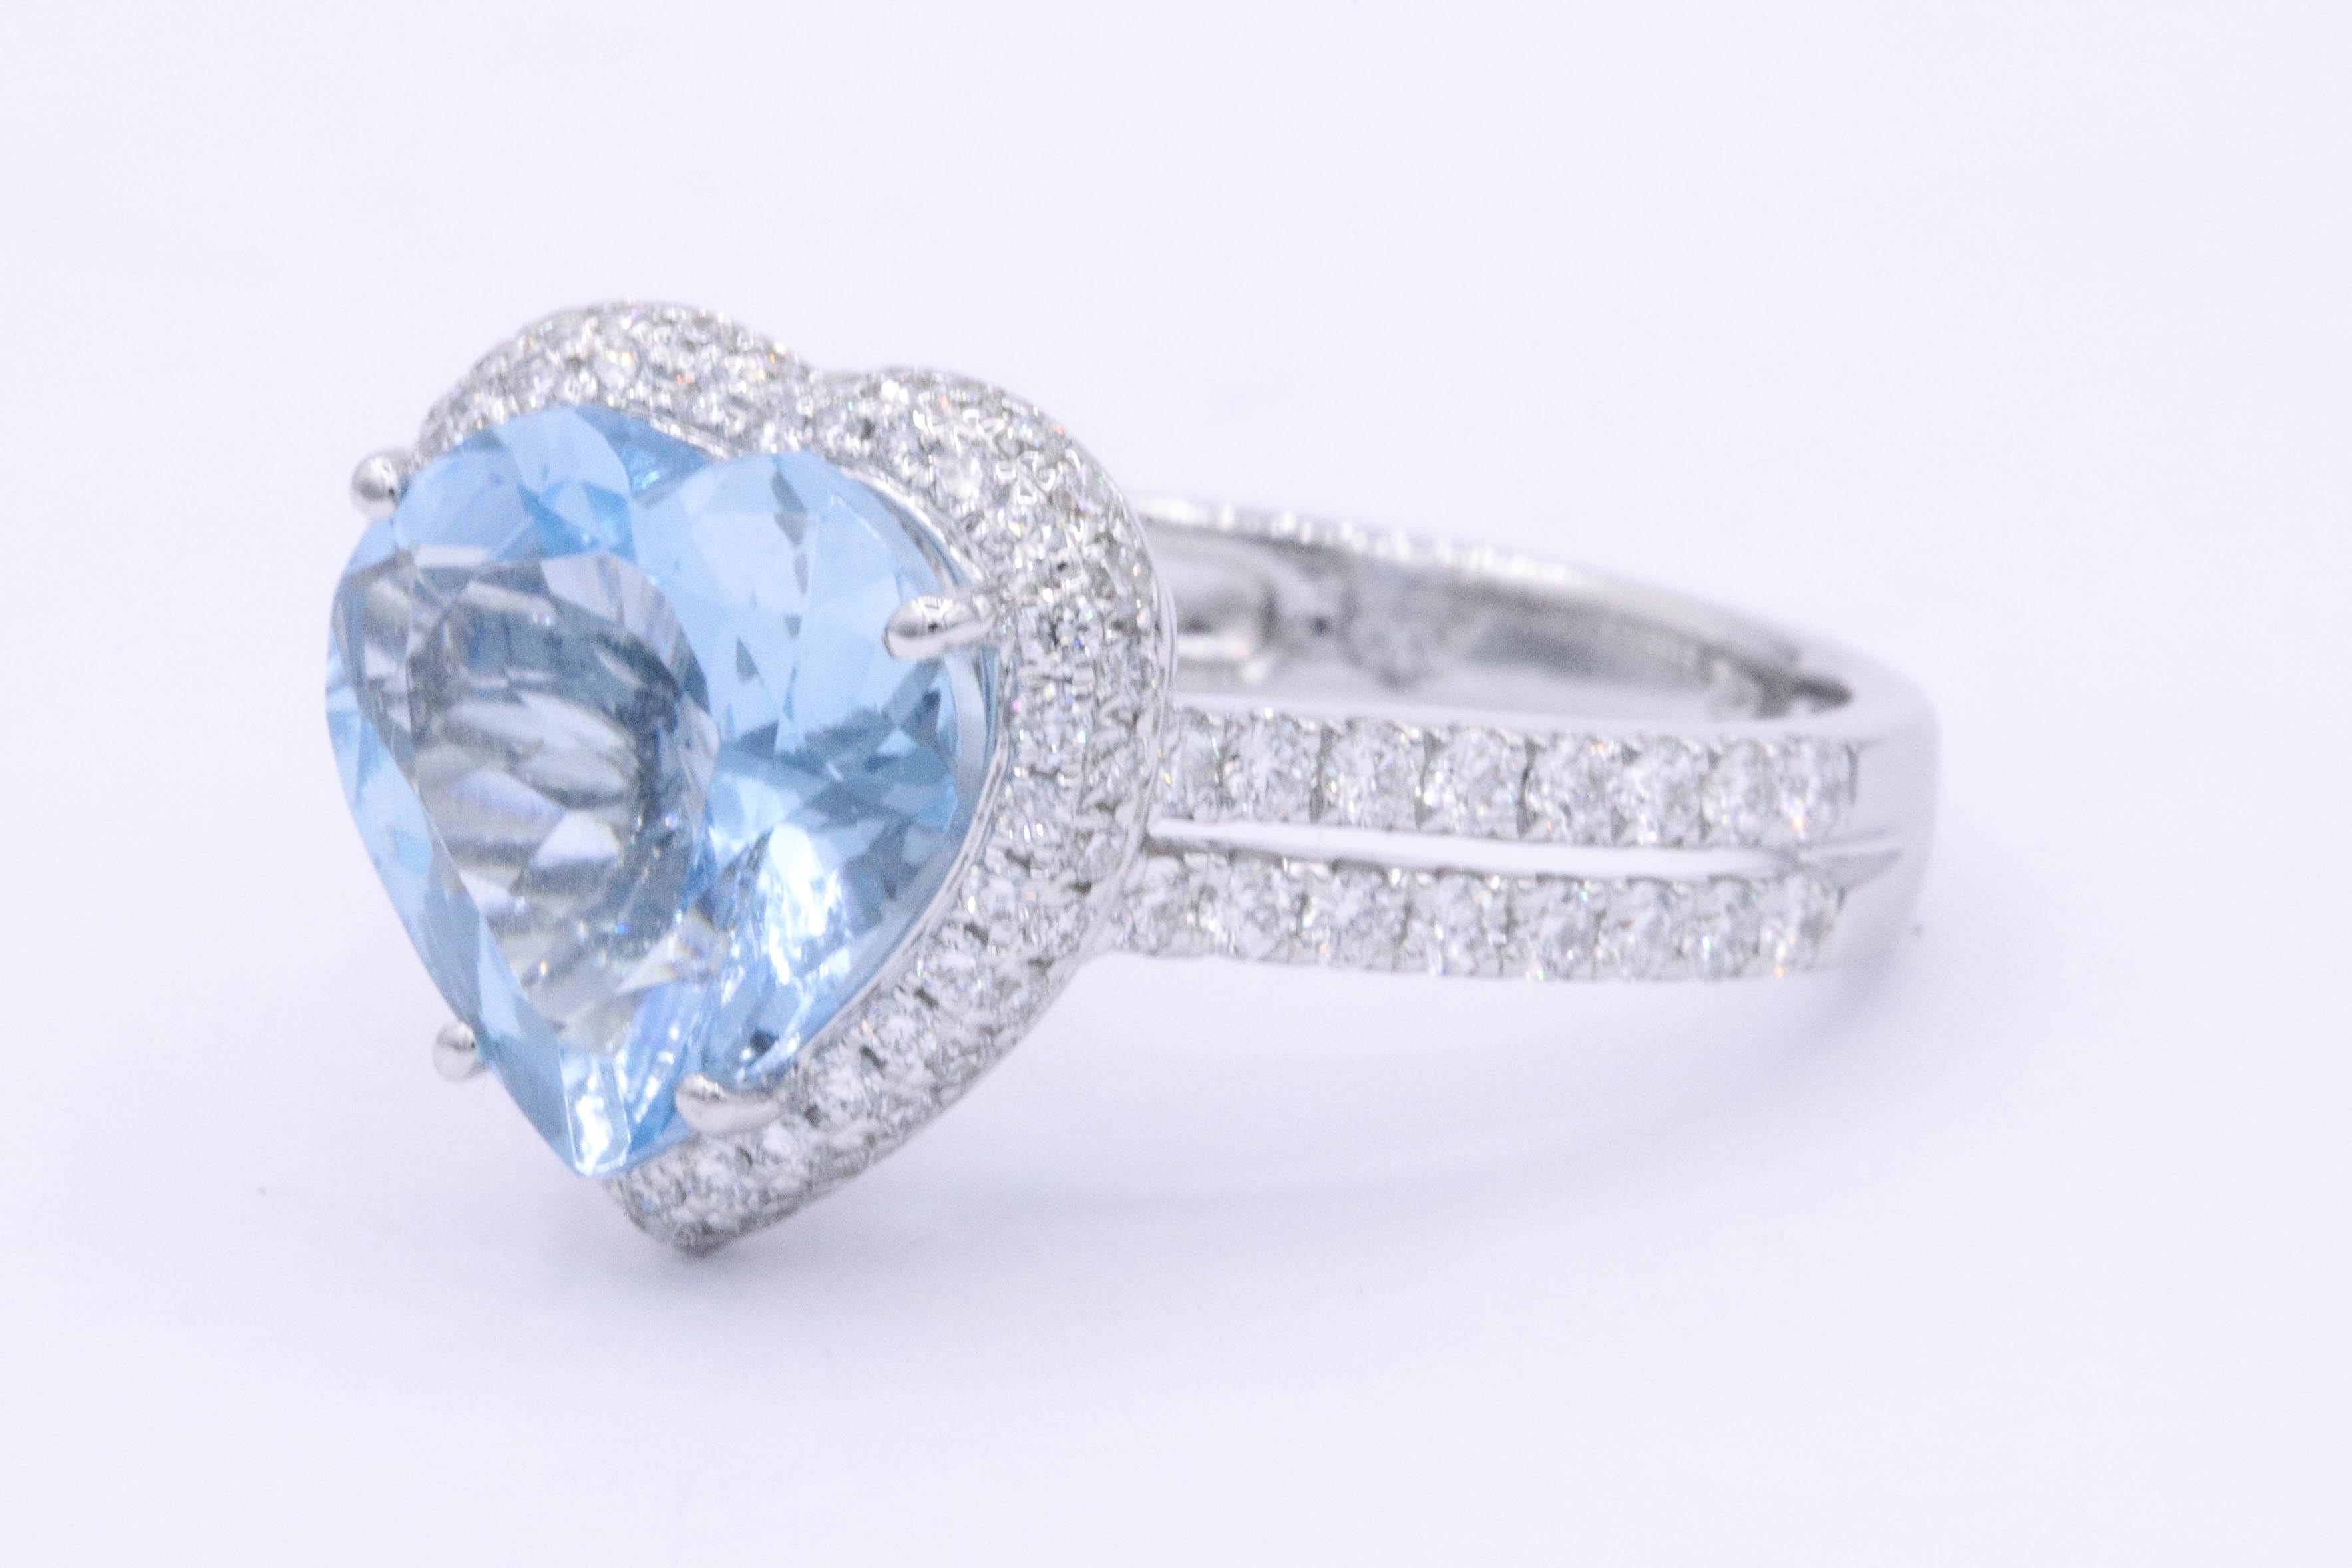 18K White gold ring featuring one heart shaped Aquamarine weighing 3.47 carats flanked with round brilliants weighing 0.80 carats. Color G-H Clarity VS-SI
10x 11 mm
